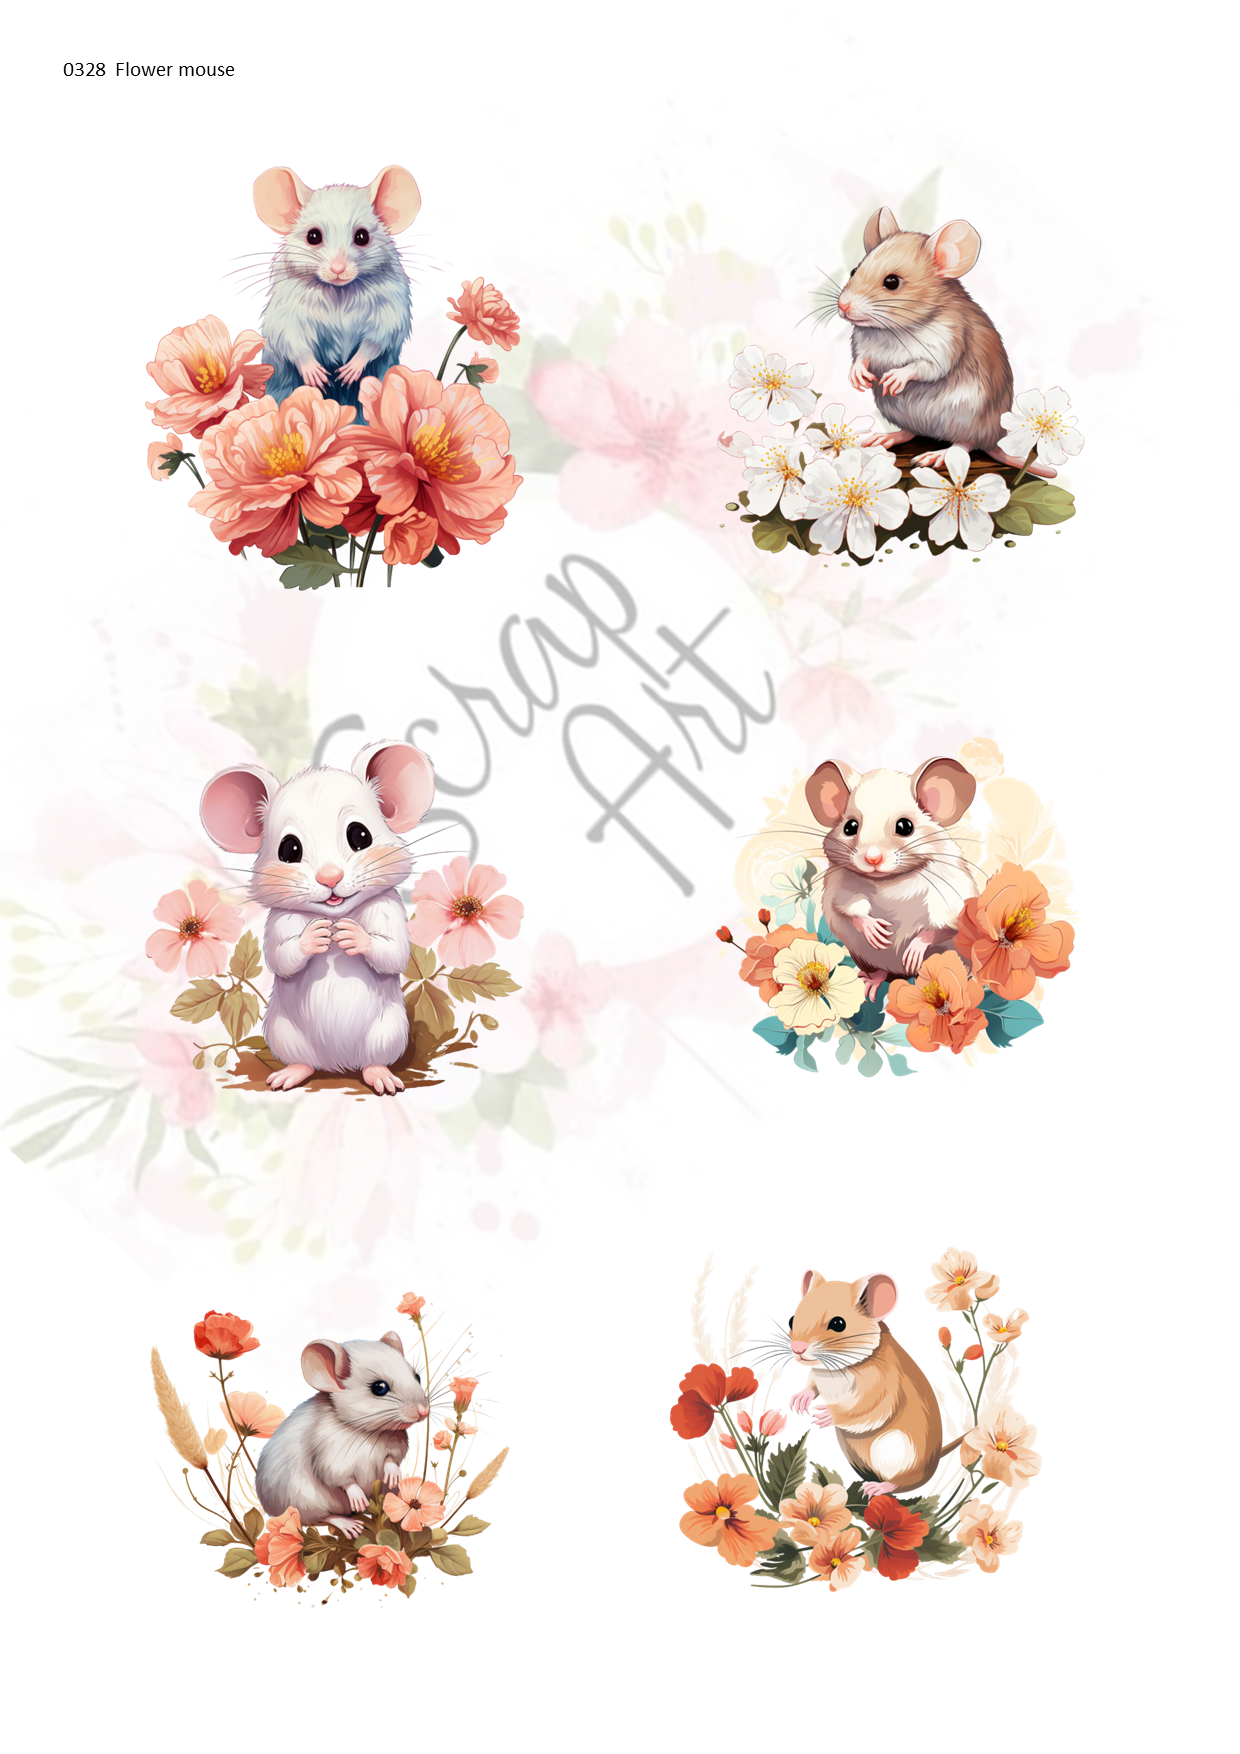 0328 Flower mouse